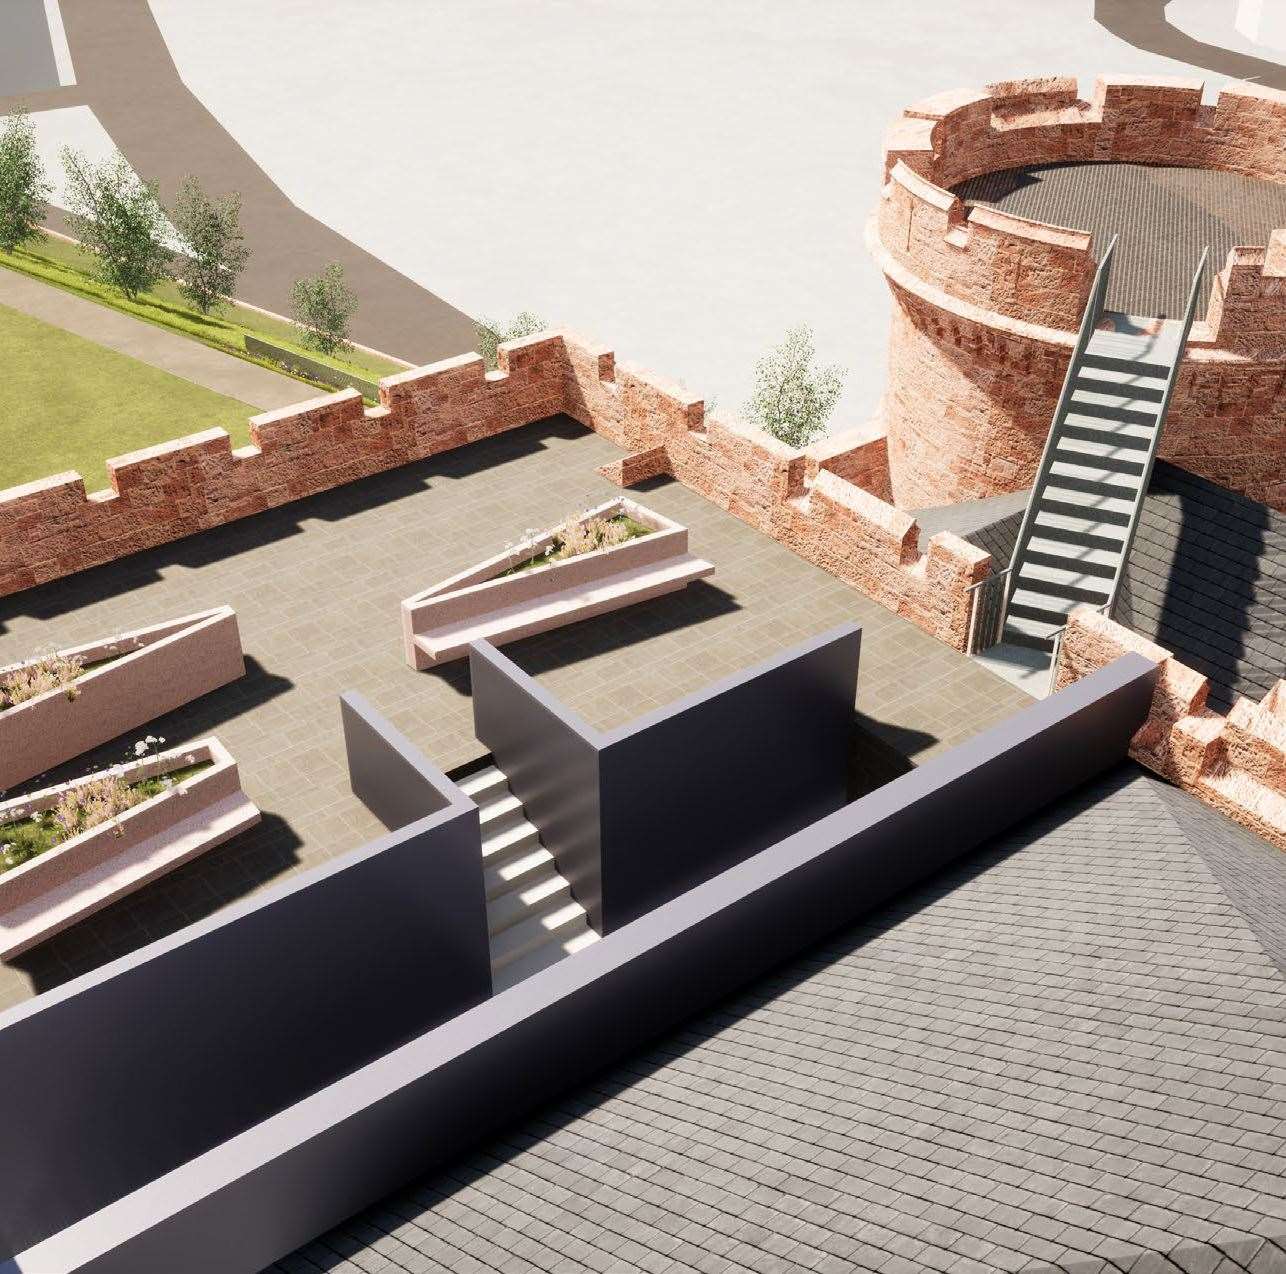 The transformation of Inverness Castle includes a new roof terrace.